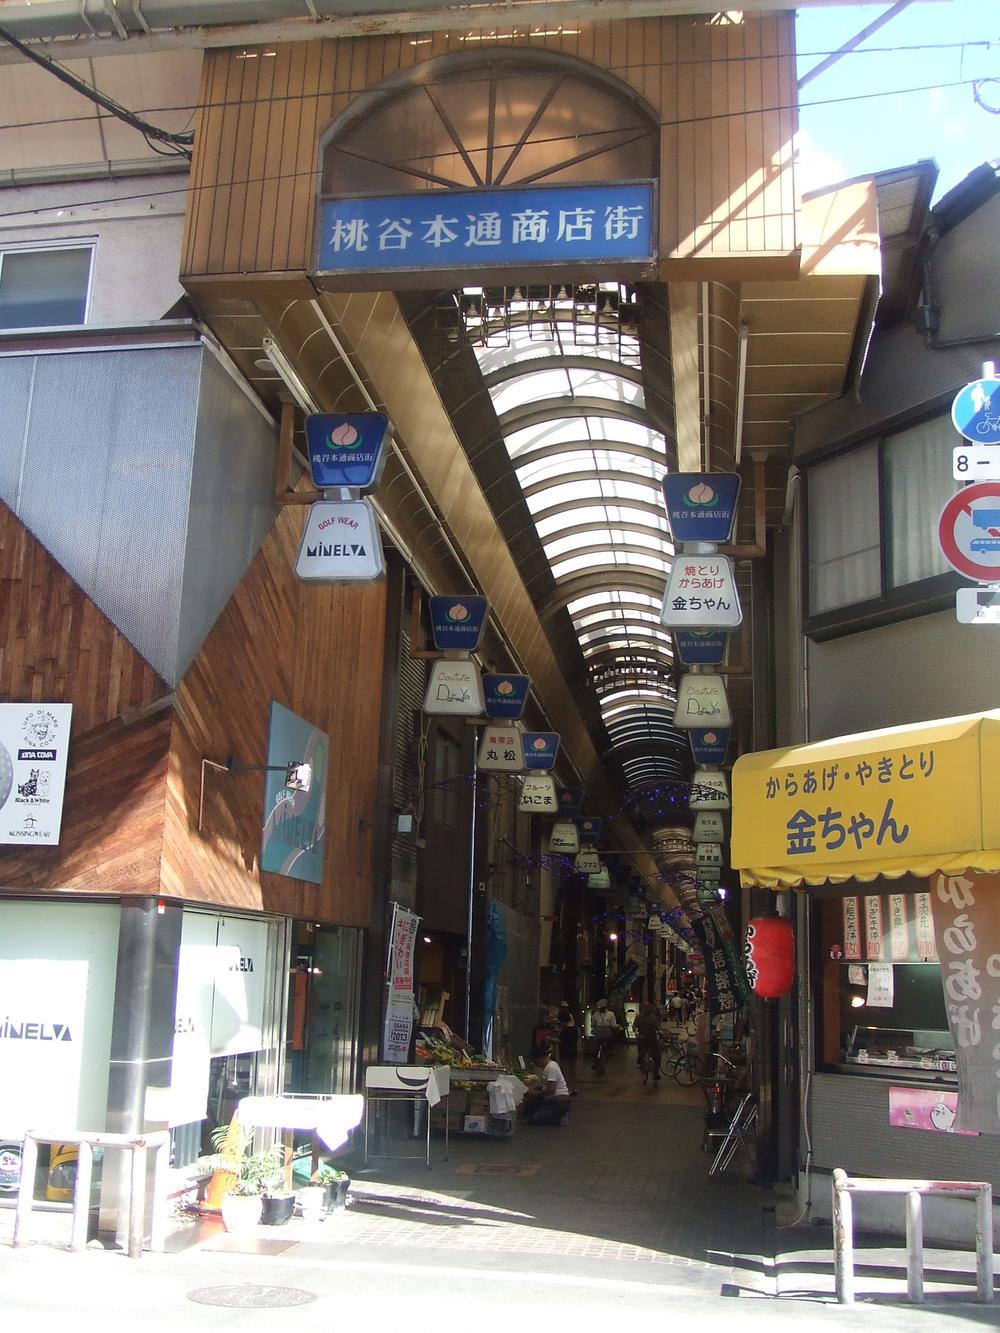 Other. Is a 1-minute walk from the Momodani Hondori shopping street.